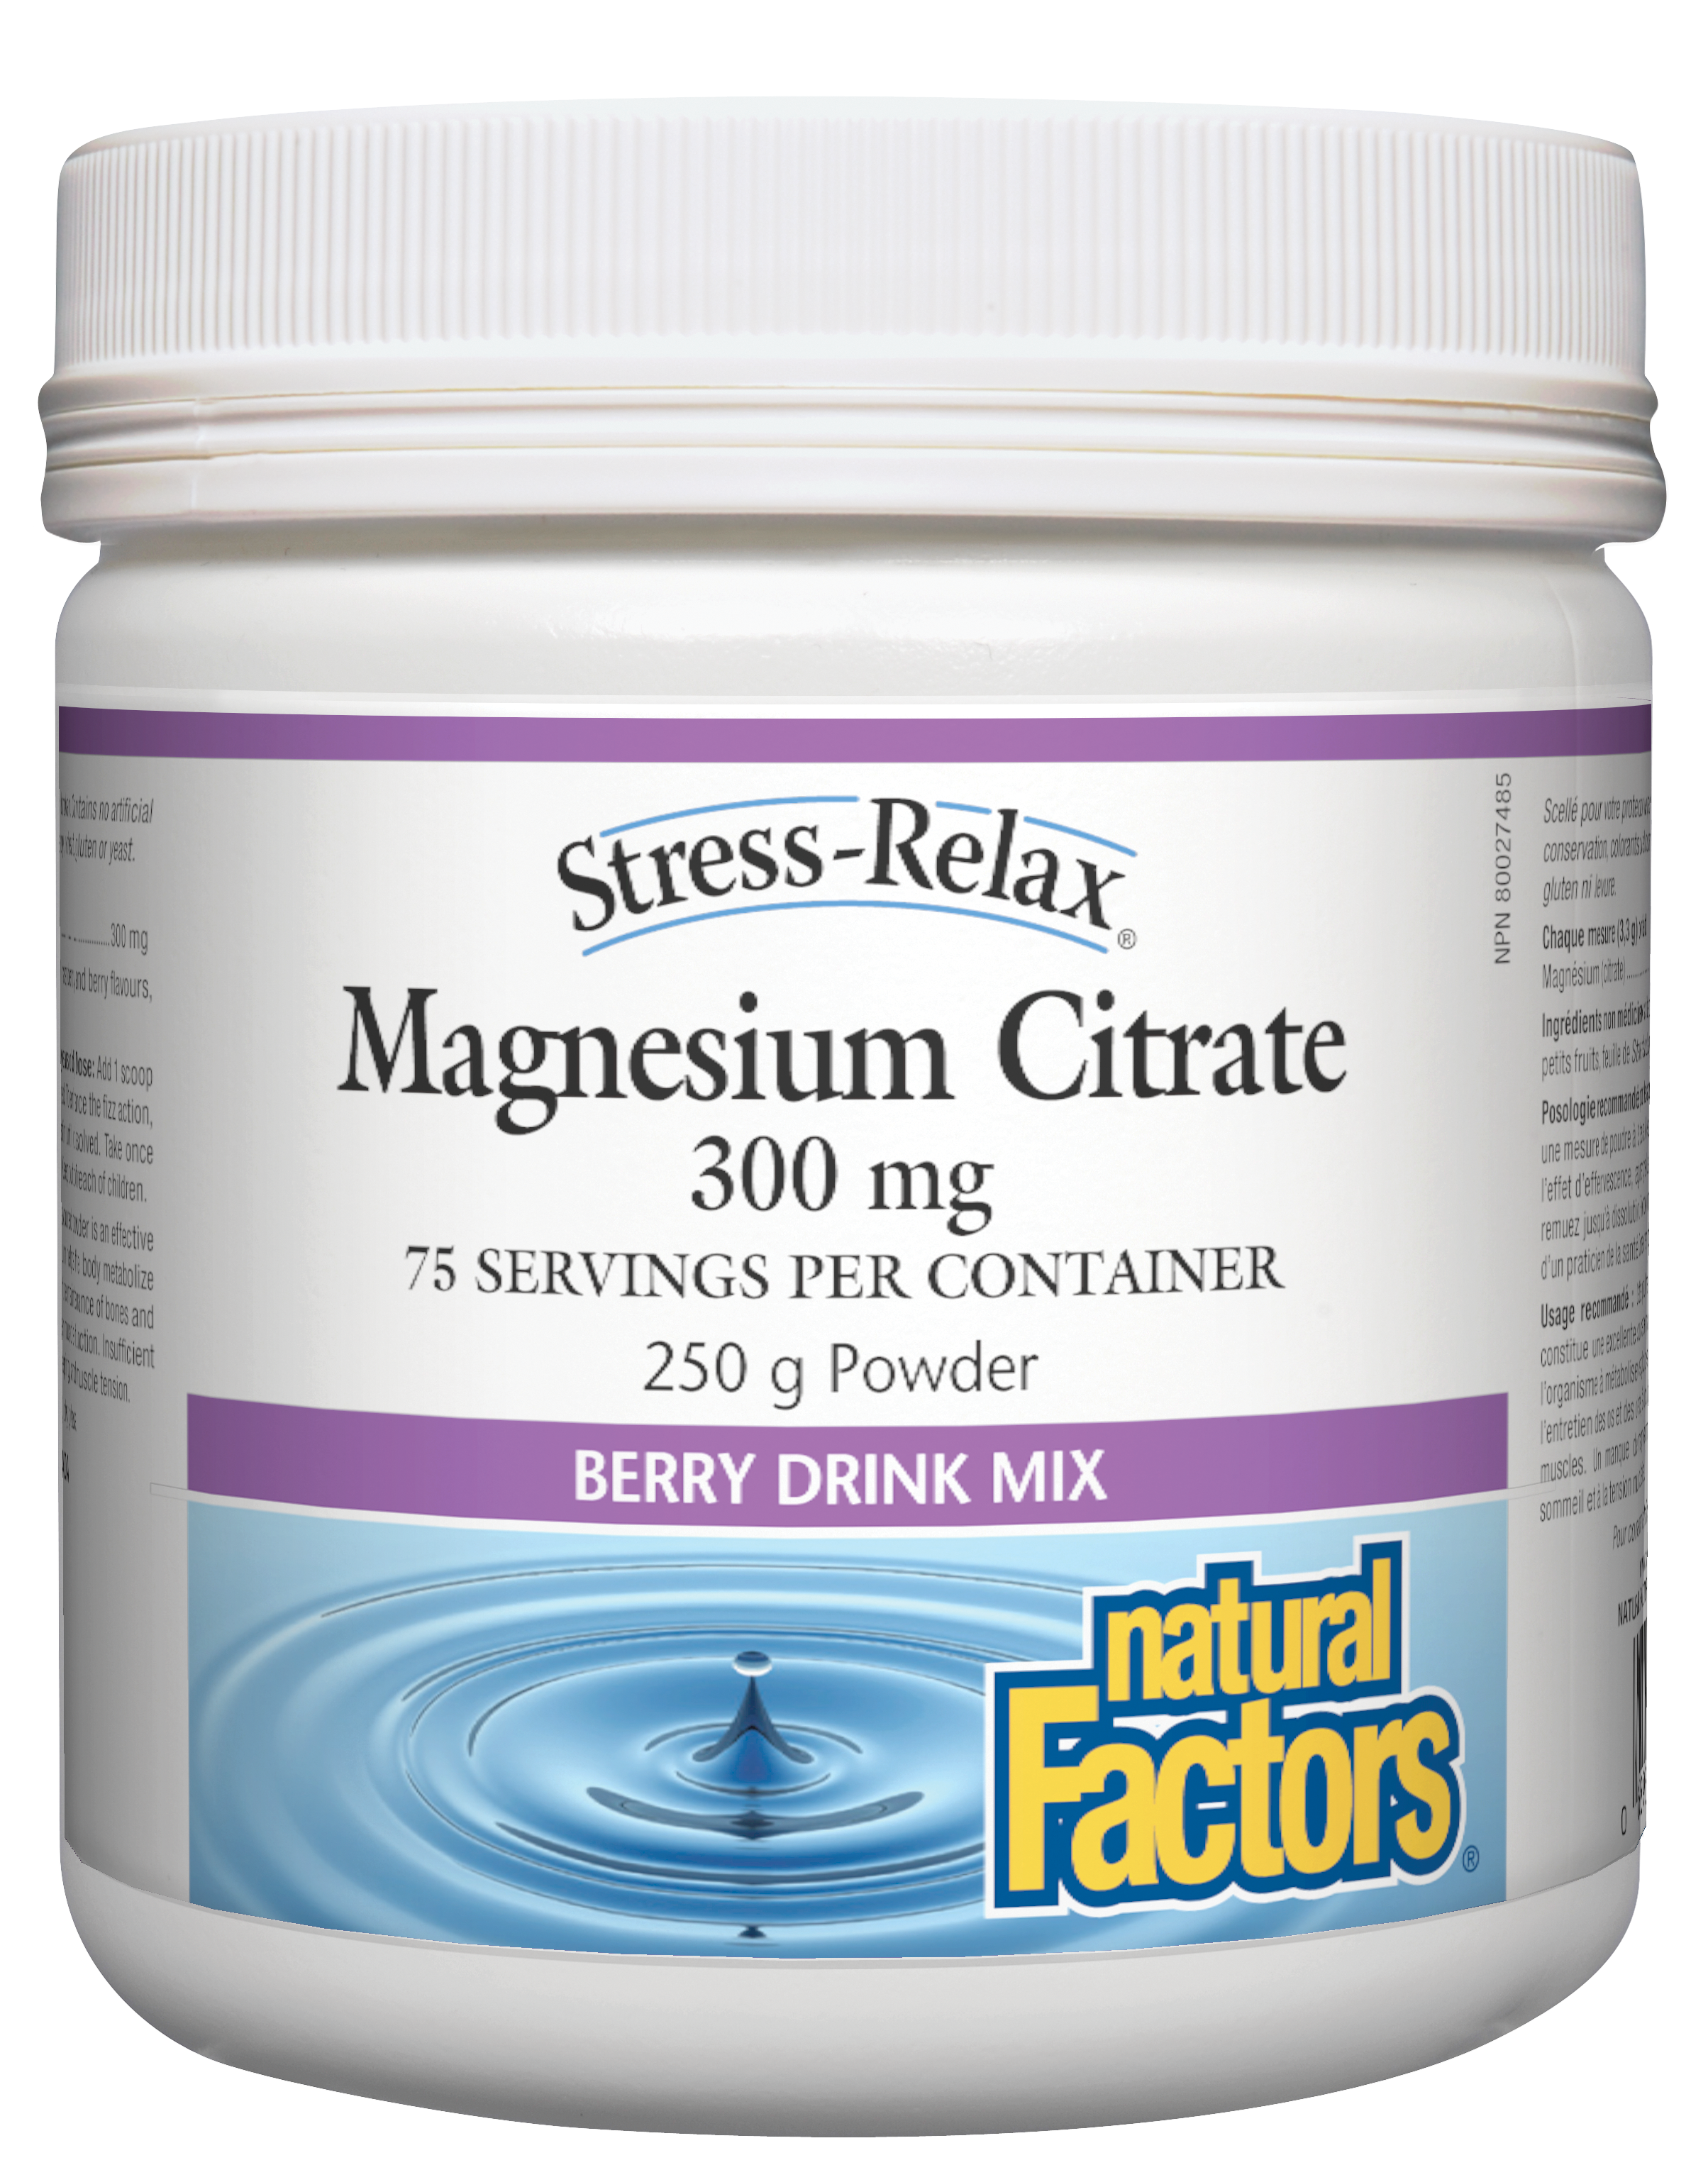 Natural Factors Stress-Relax Magnesium Citrate 300mg Berry Drink Mix 250g